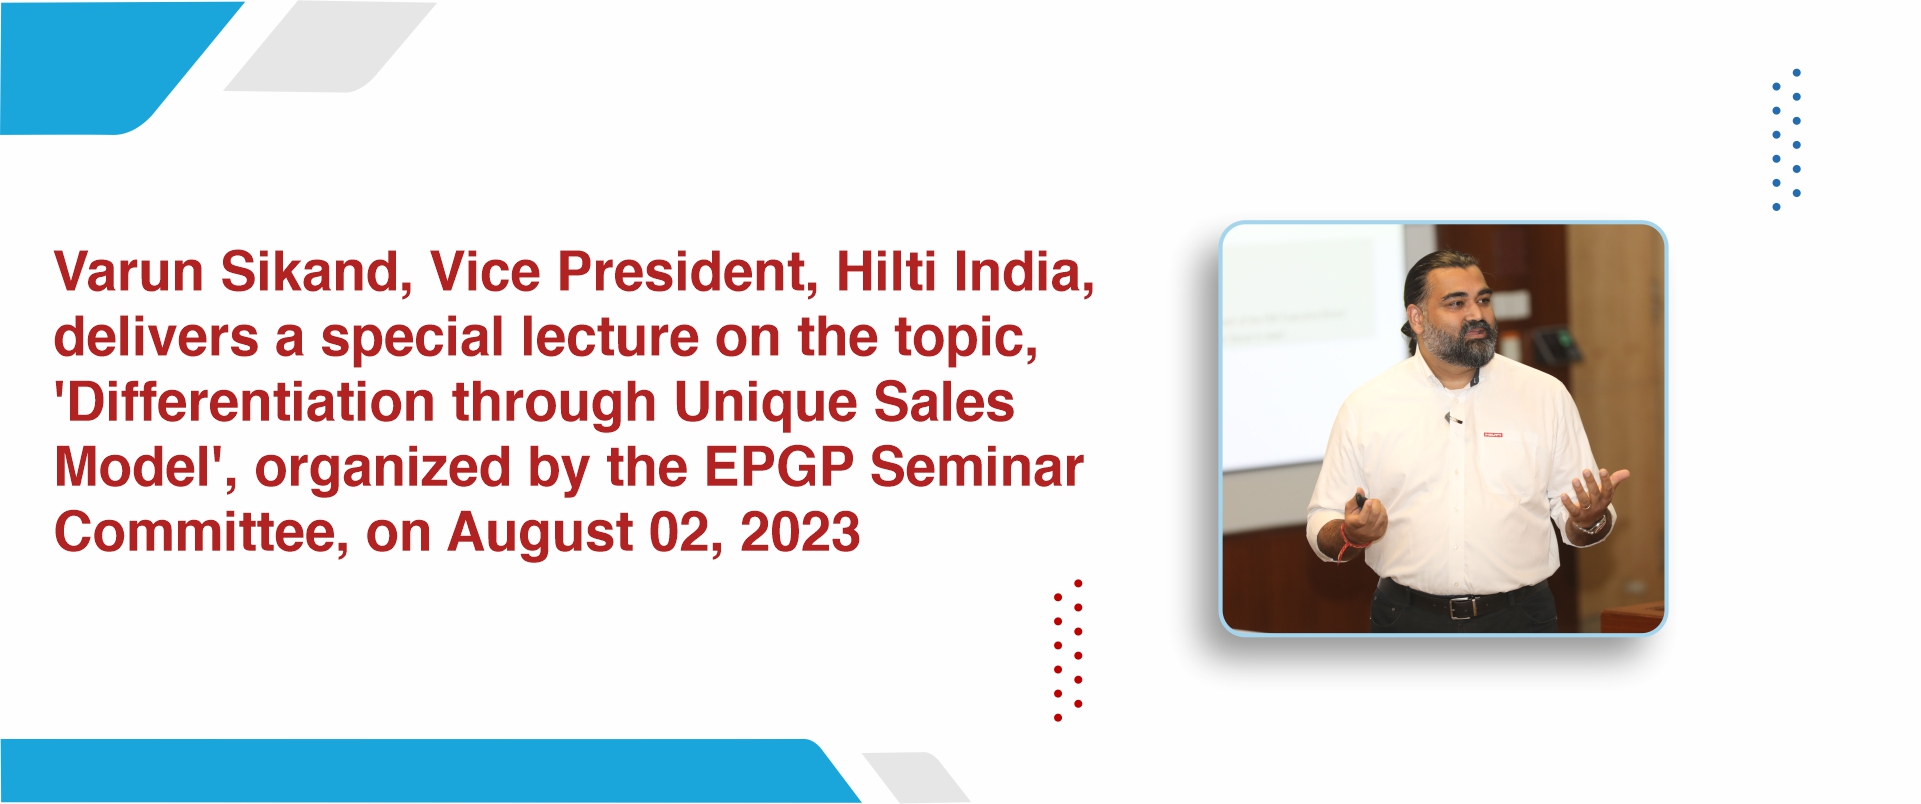 EPGP Seminar Committee hosts session on ‘Differentiation through Unique Sales Model’ on 2nd August